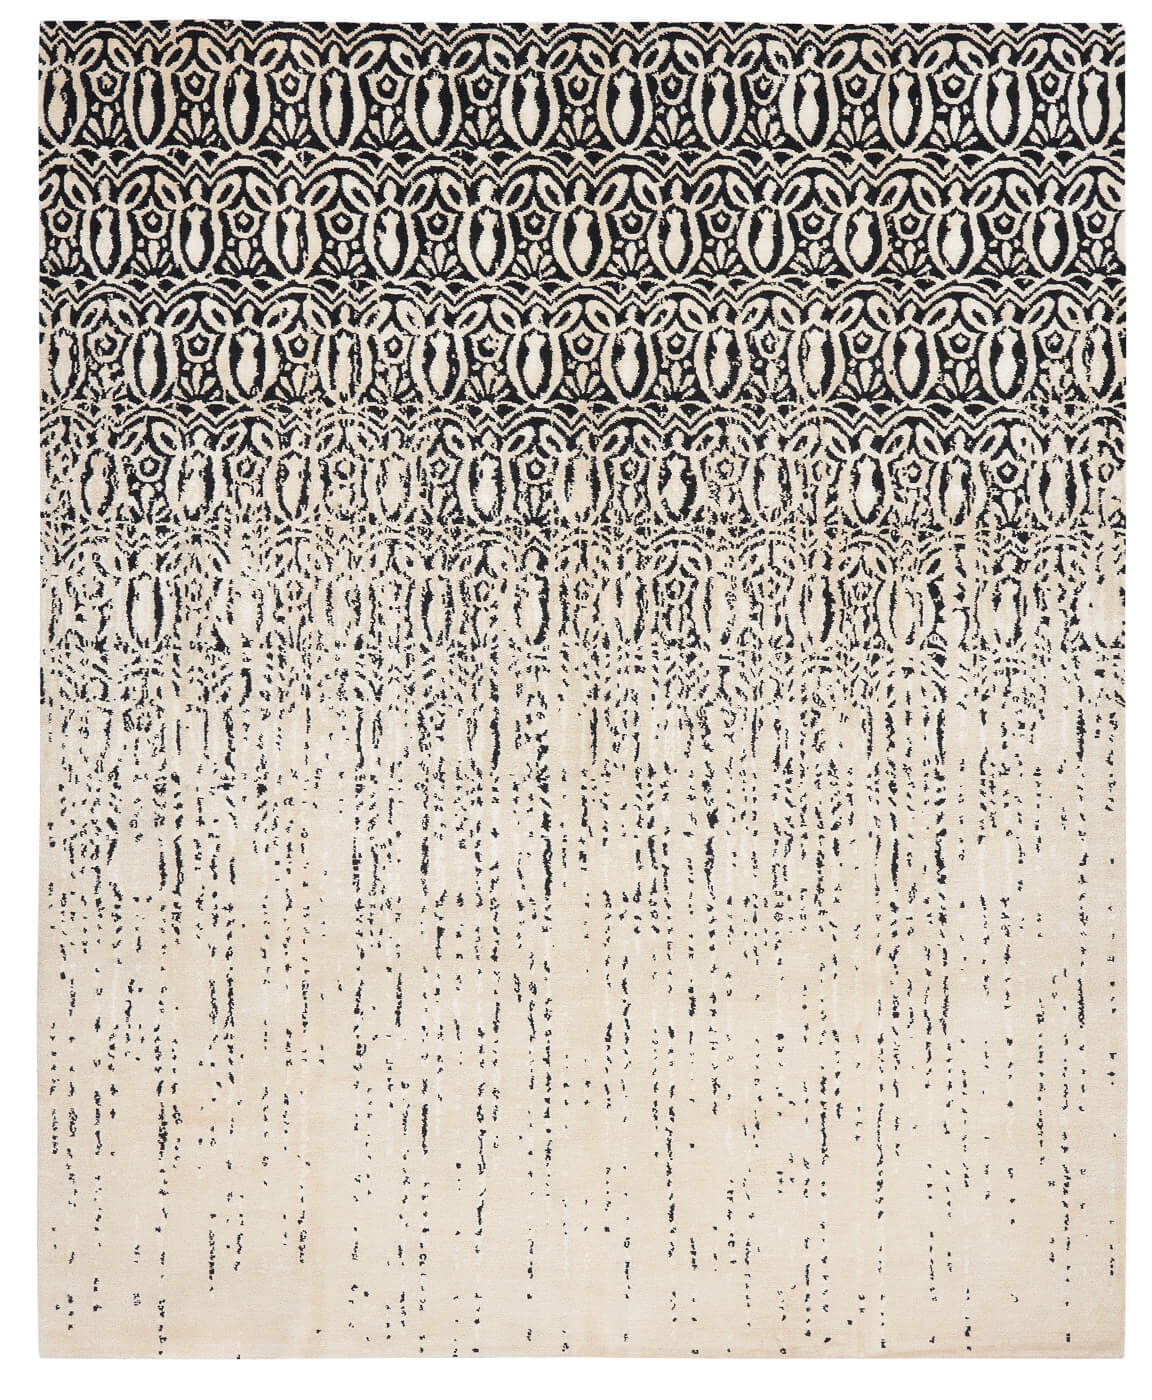 Black & White Hand-knotted Art Rug